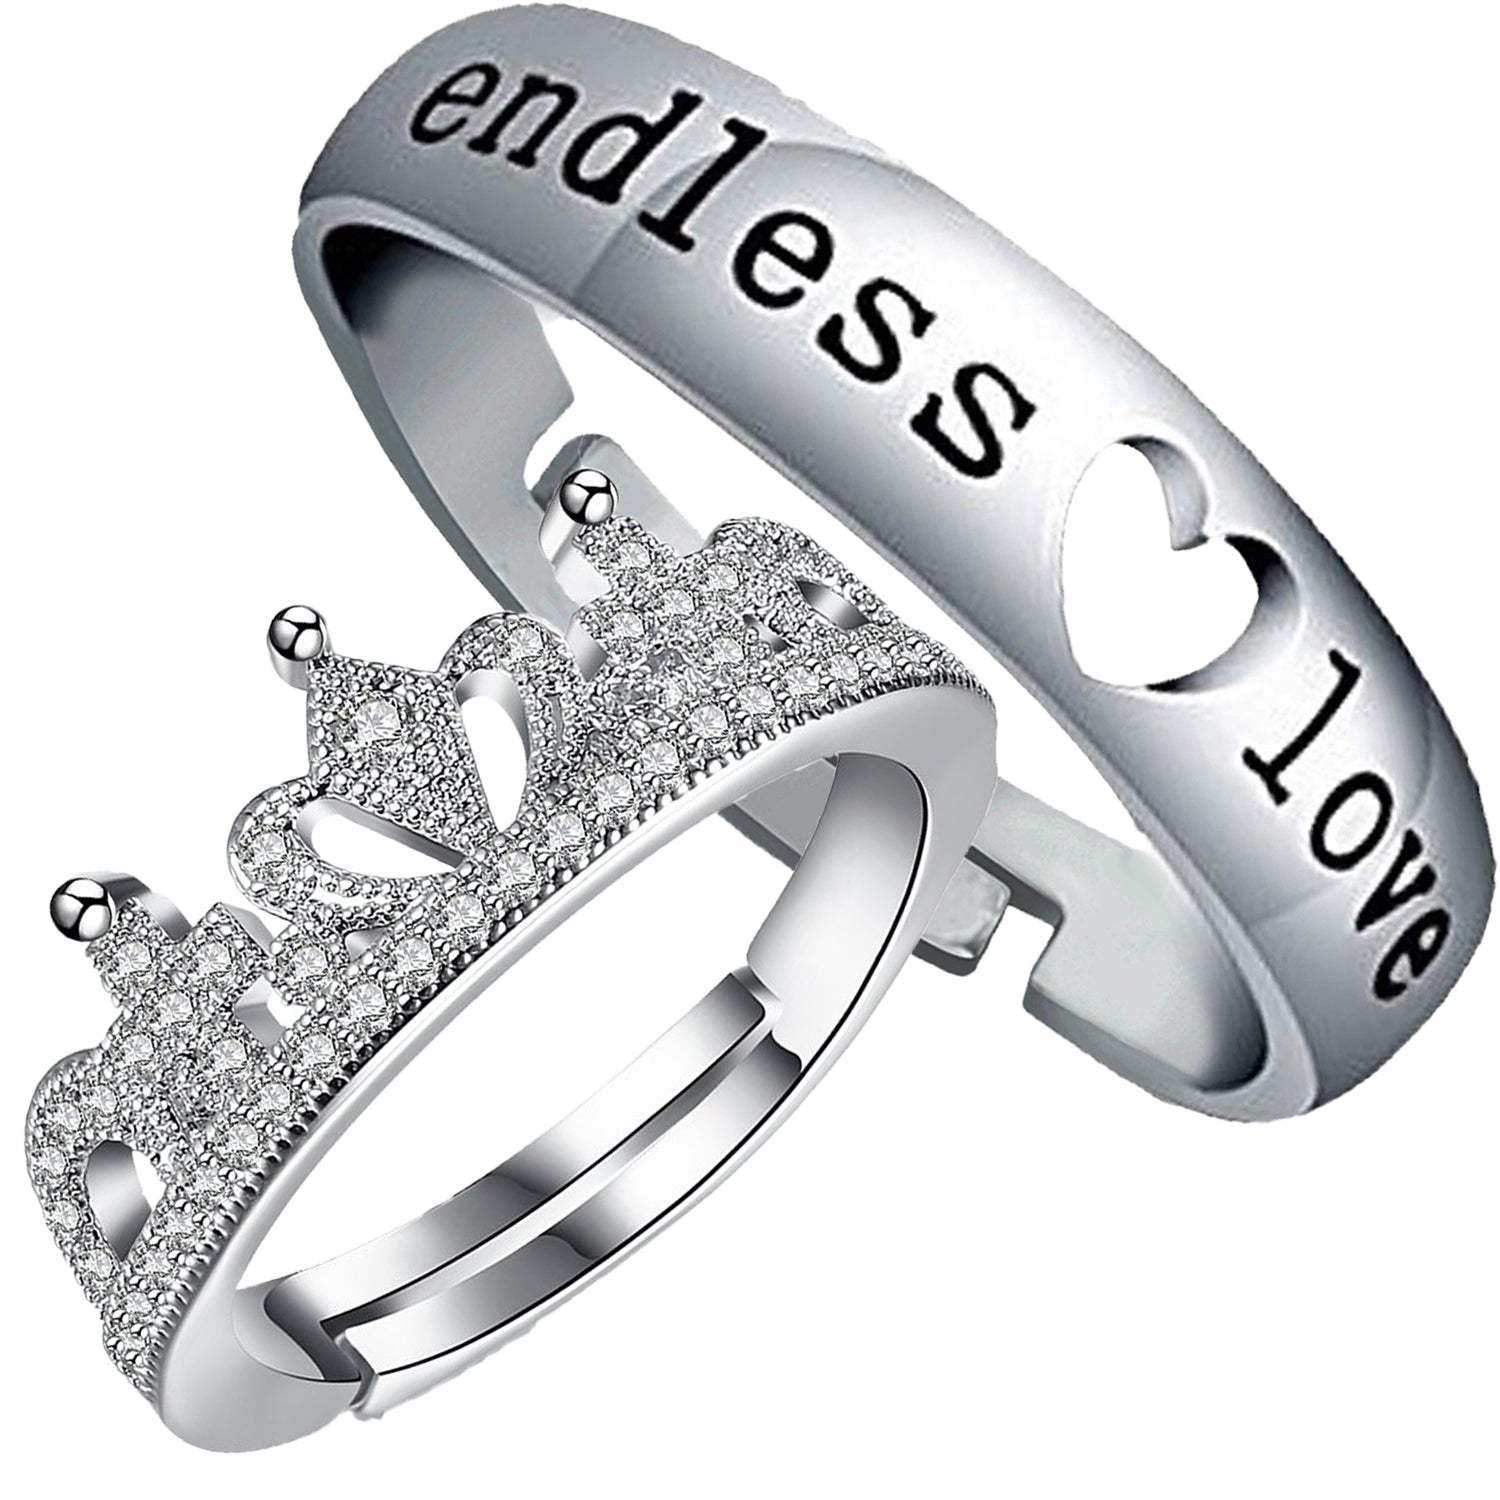 Endless Love and Crown' Proposal Adjustable Couple Ring